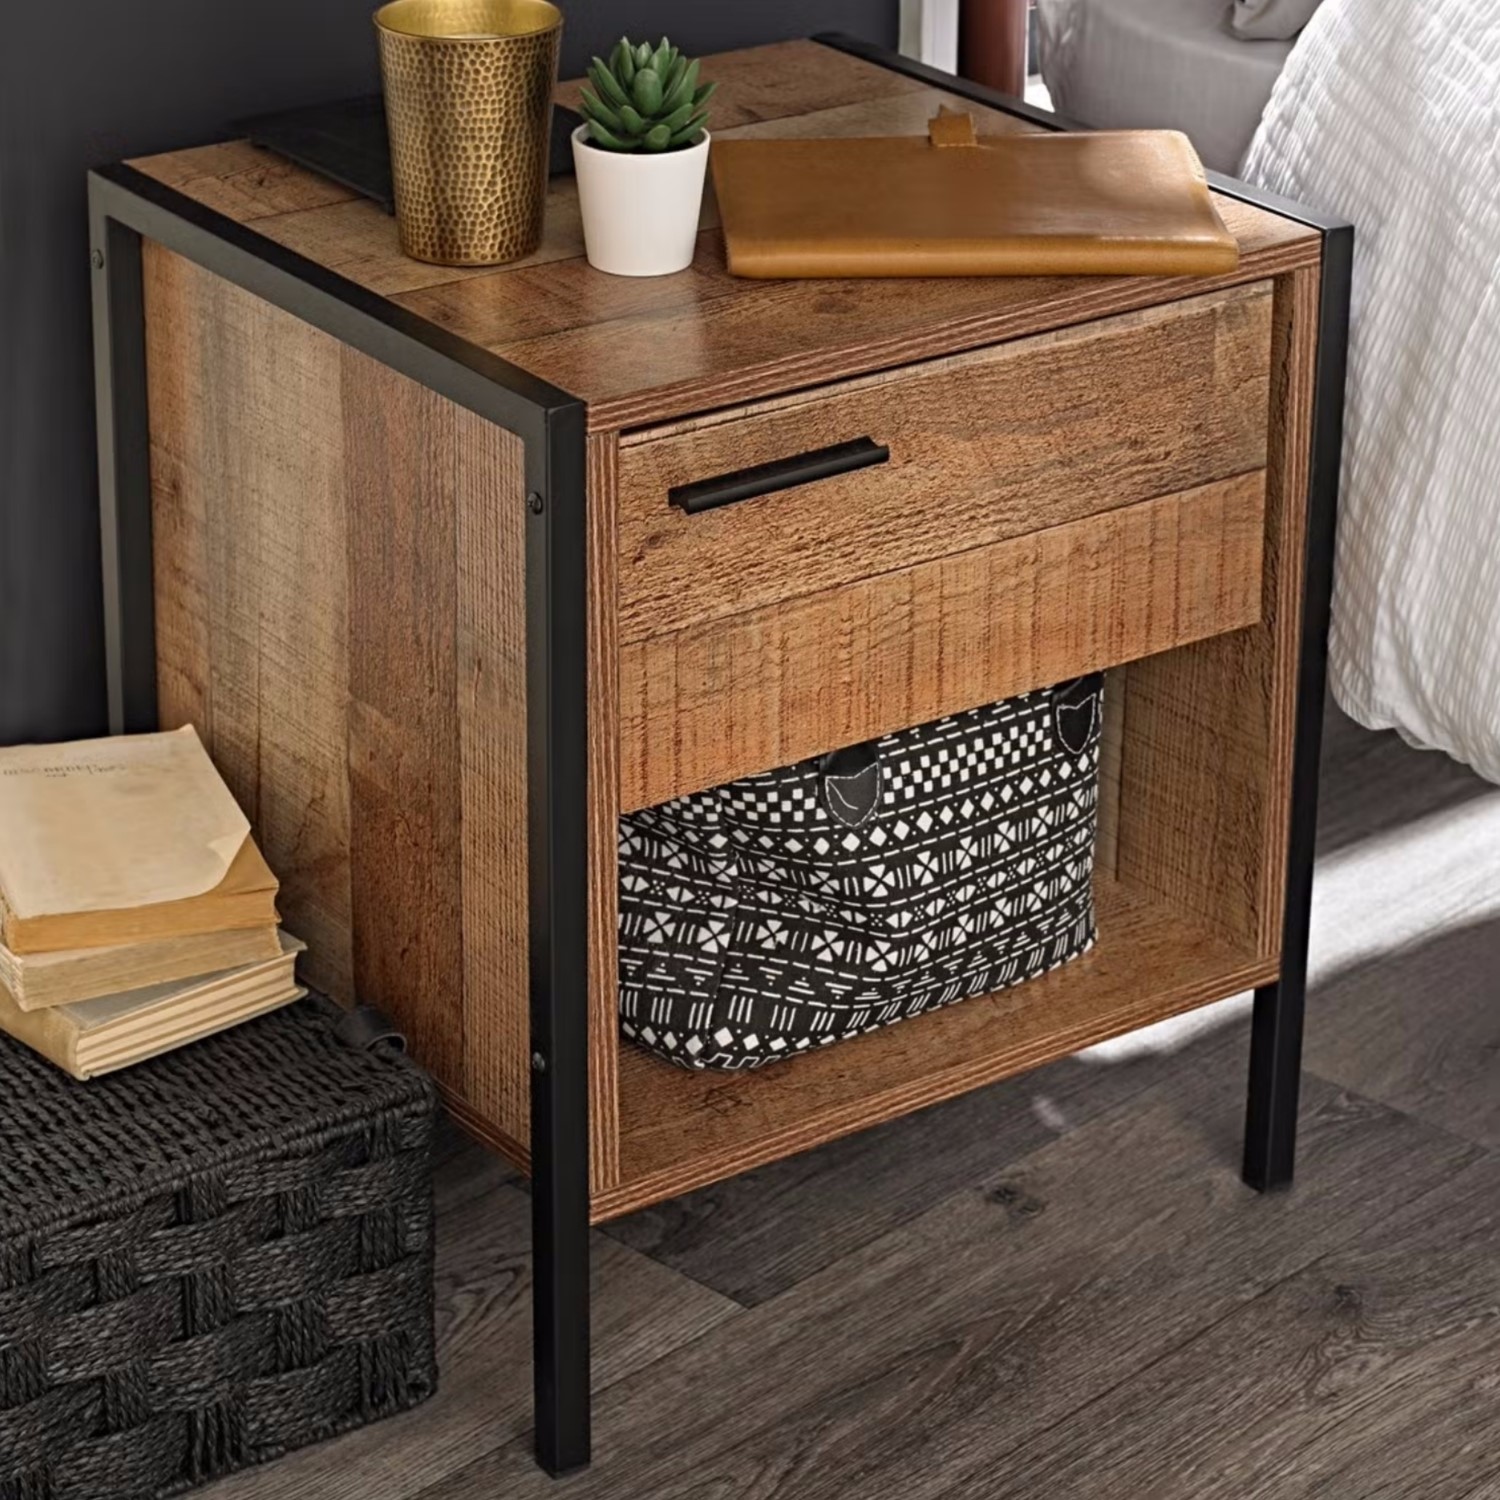 Photo of Rustic oak industrial bedside table with drawer - hoxton - lpd